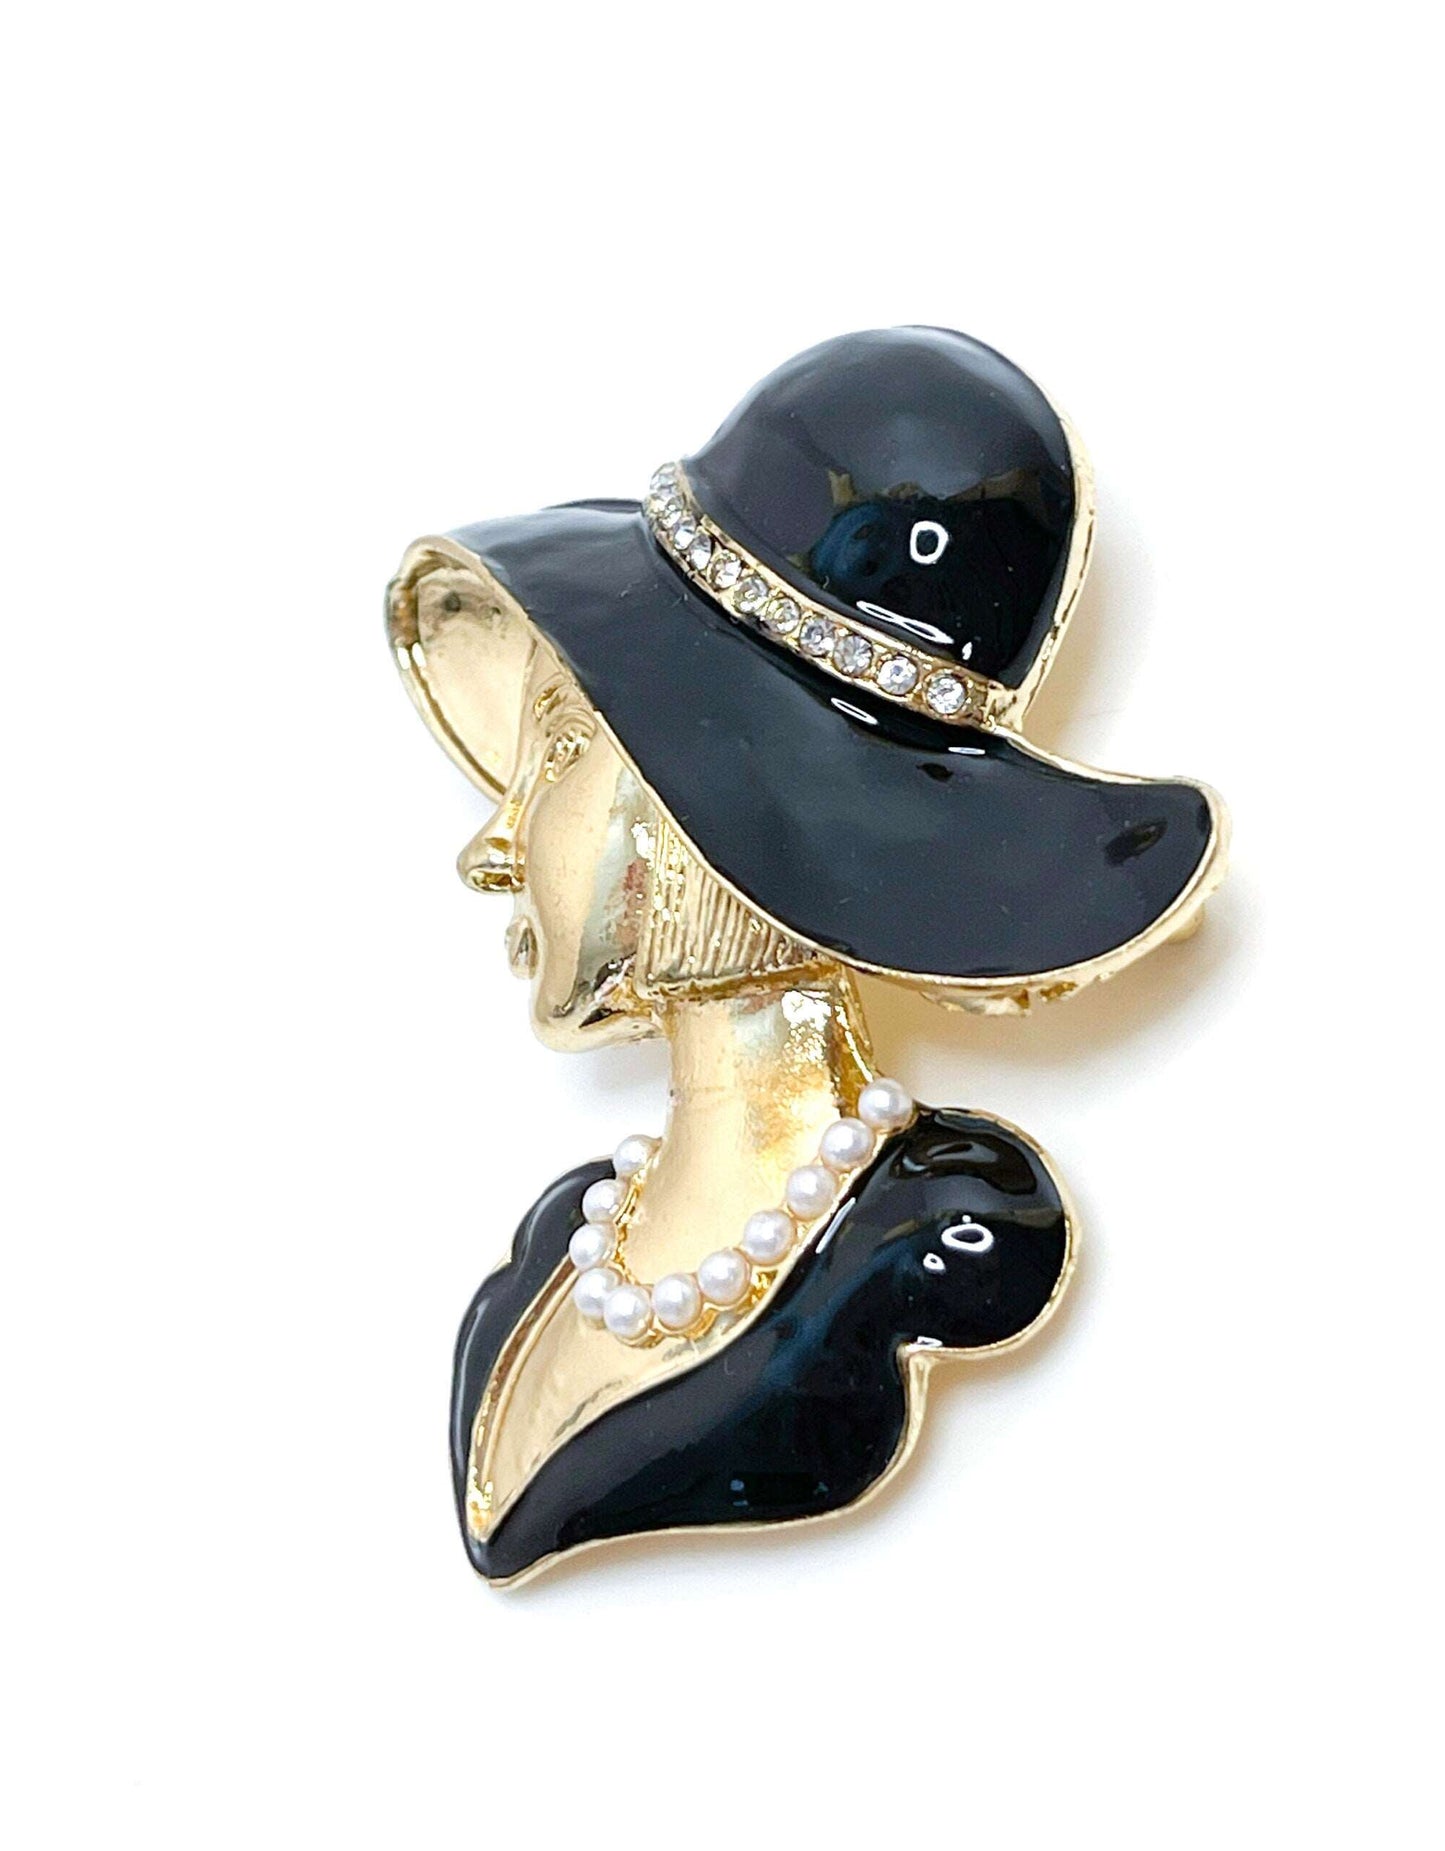 Classy Lady Brooch In Black Hat Dress with Pearls | Stylish Fashion Lady Pin